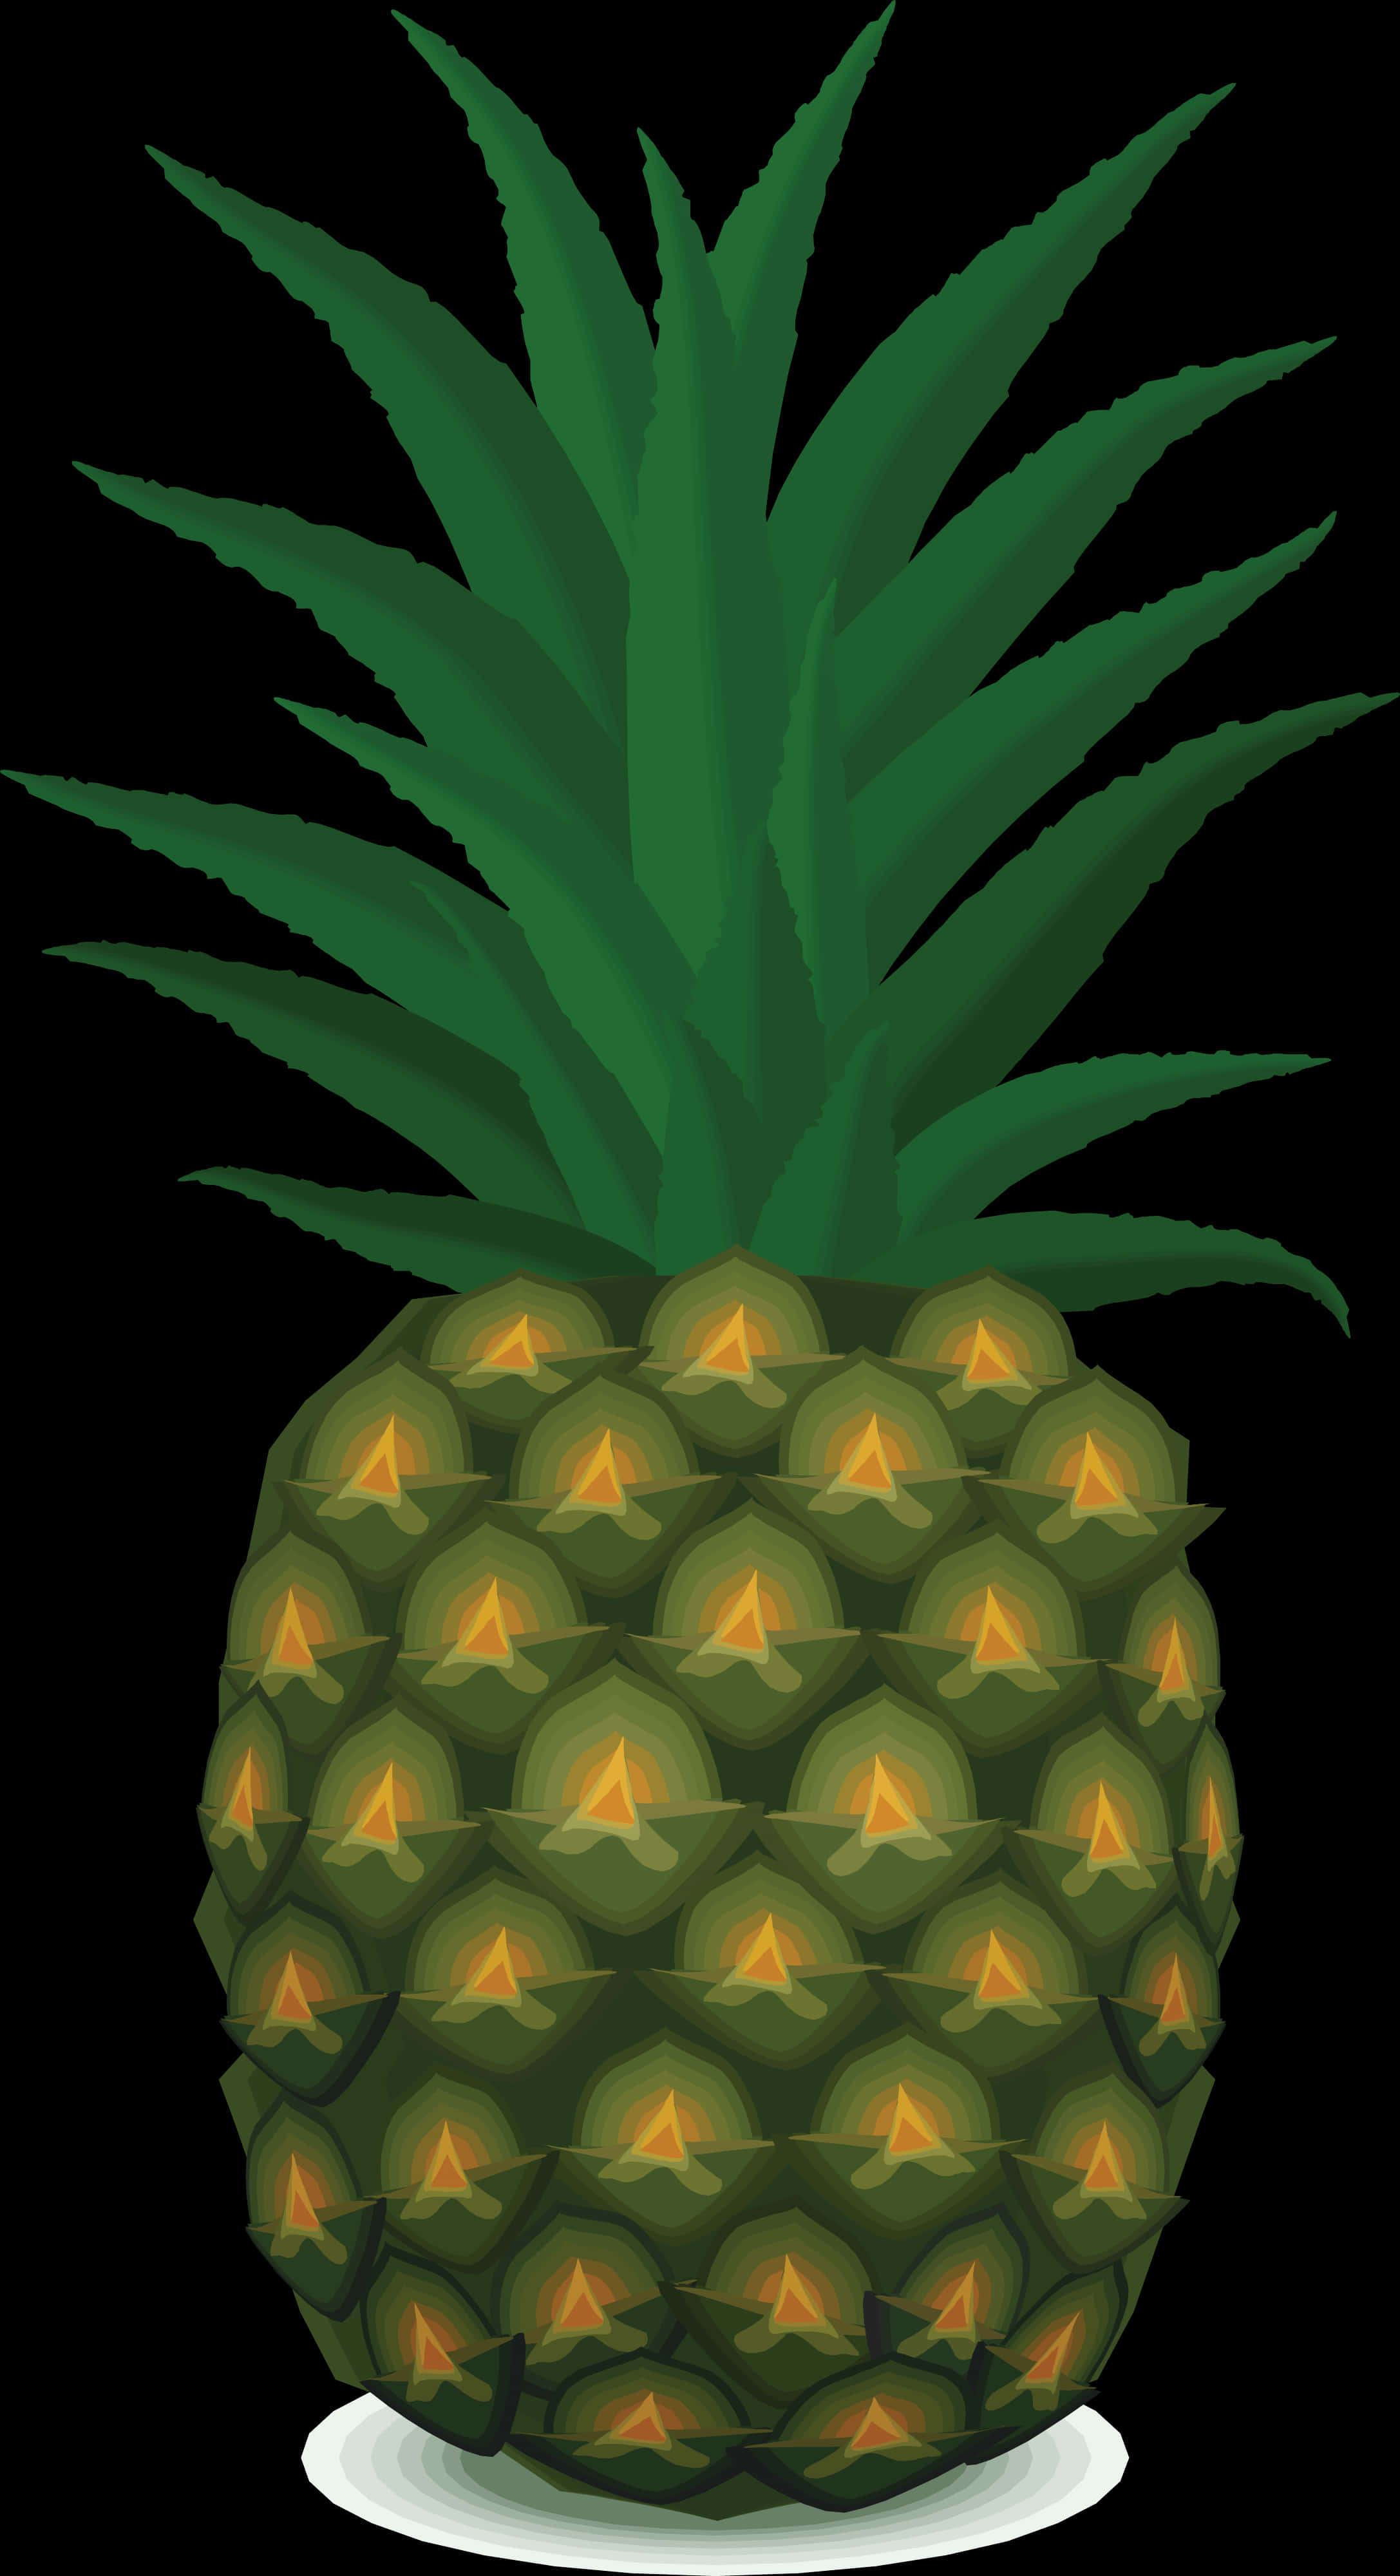 Tropical Pineapple Illustration PNG